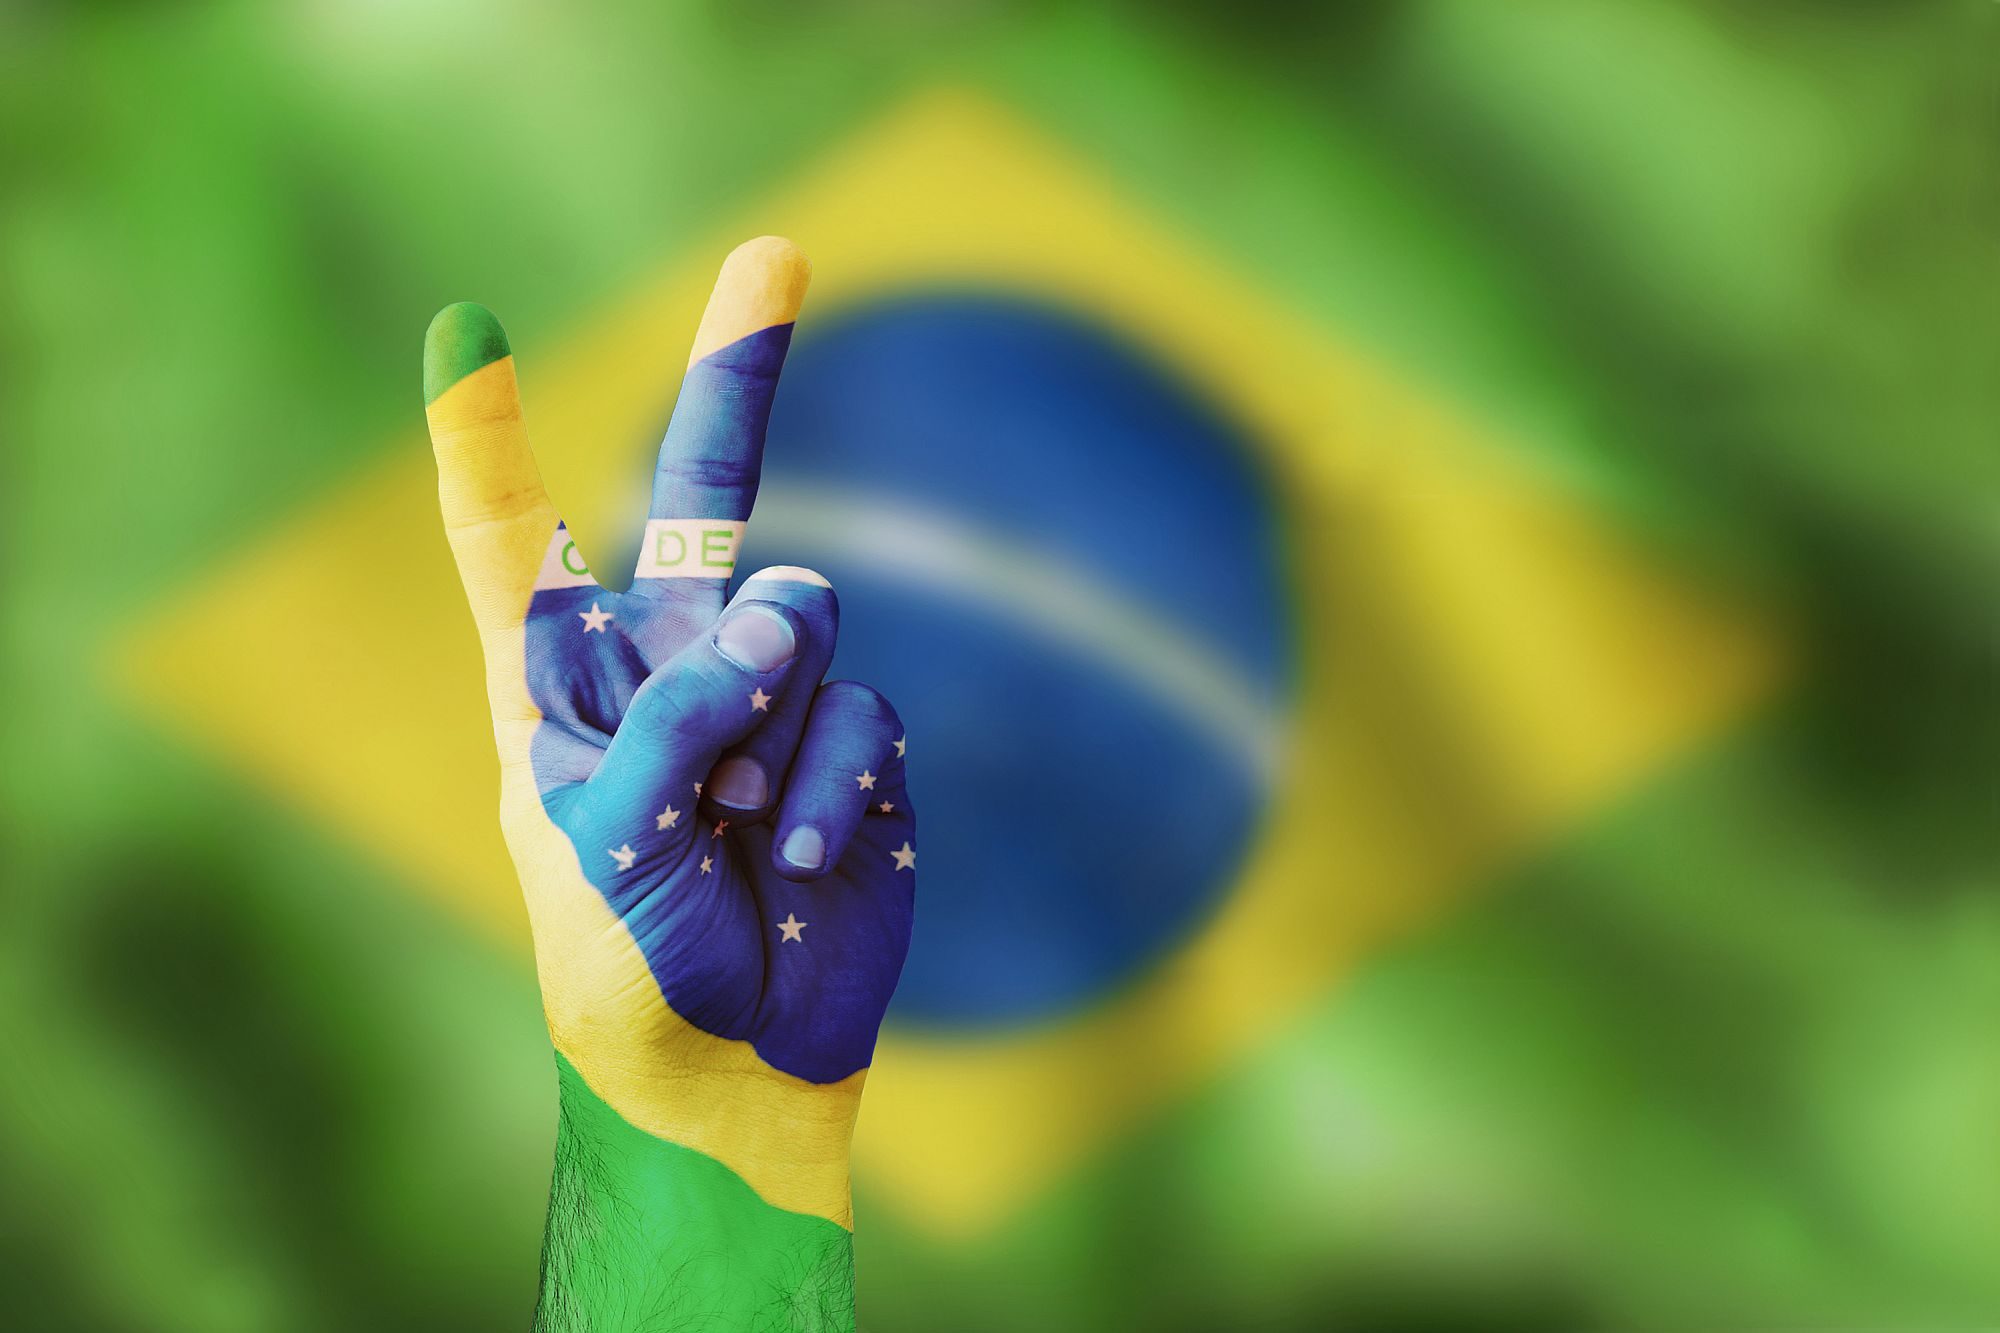 V as in victory. The Brazilian flag on the background